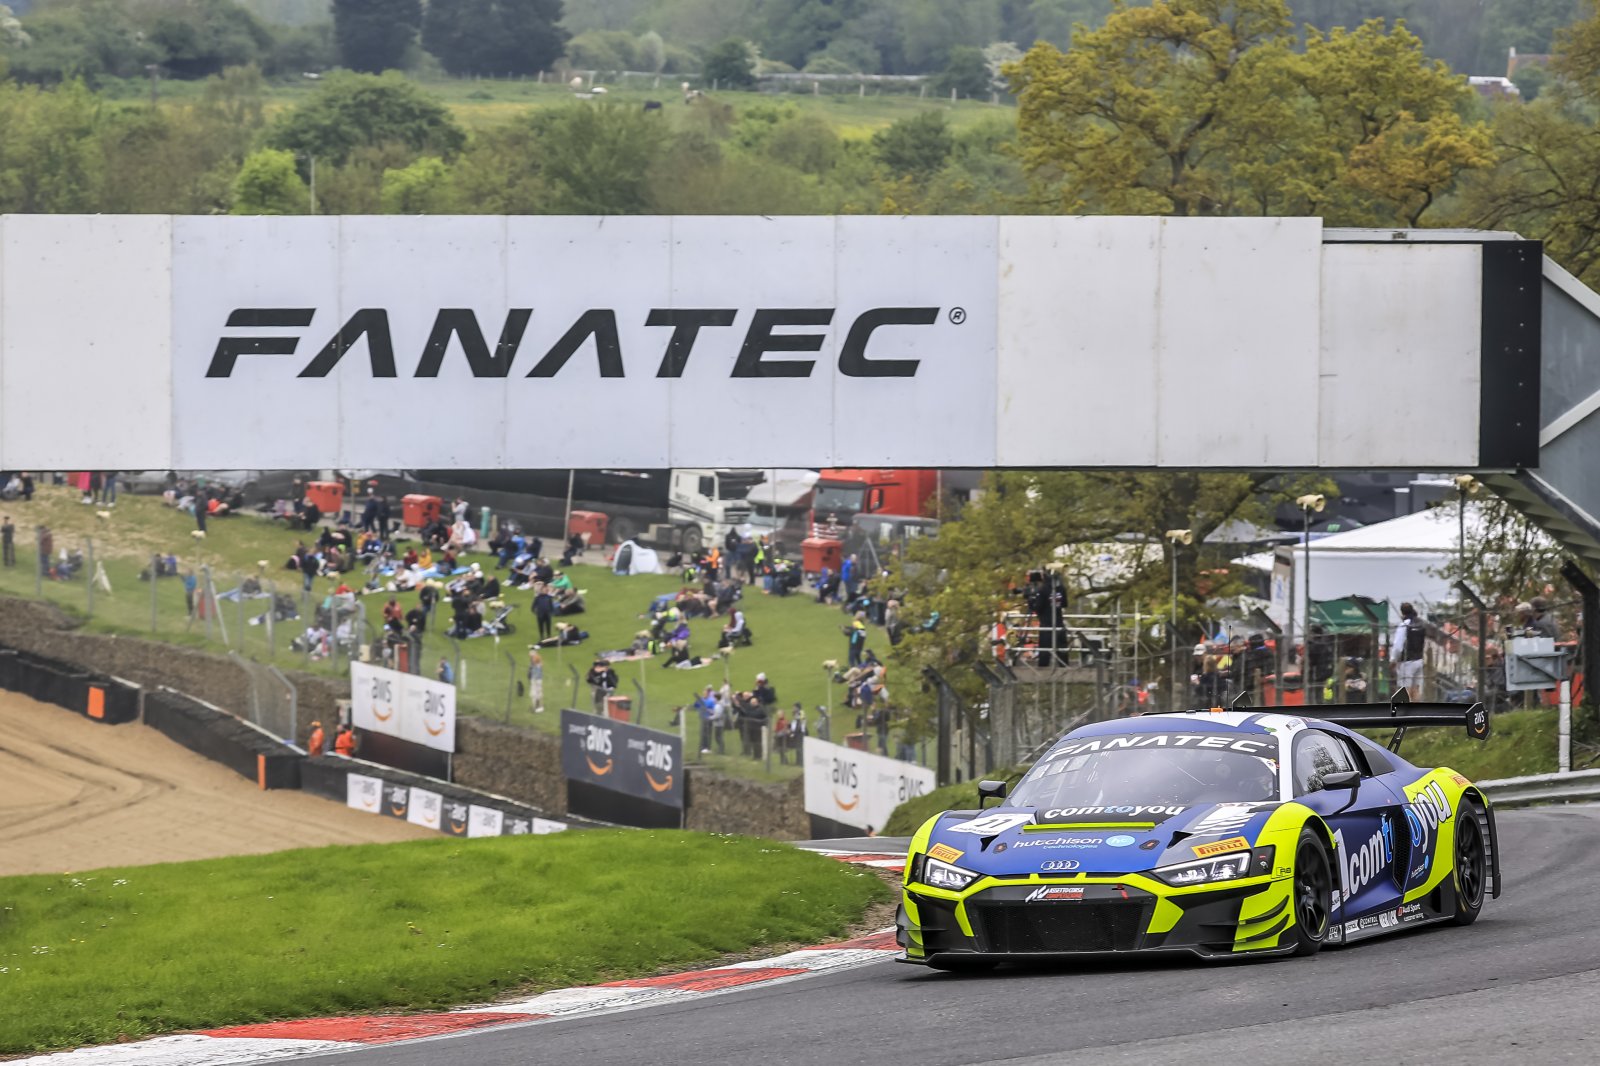 Comtoyou Racing fastest in Brands Hatch pre-qualifying as Audi shows its pace